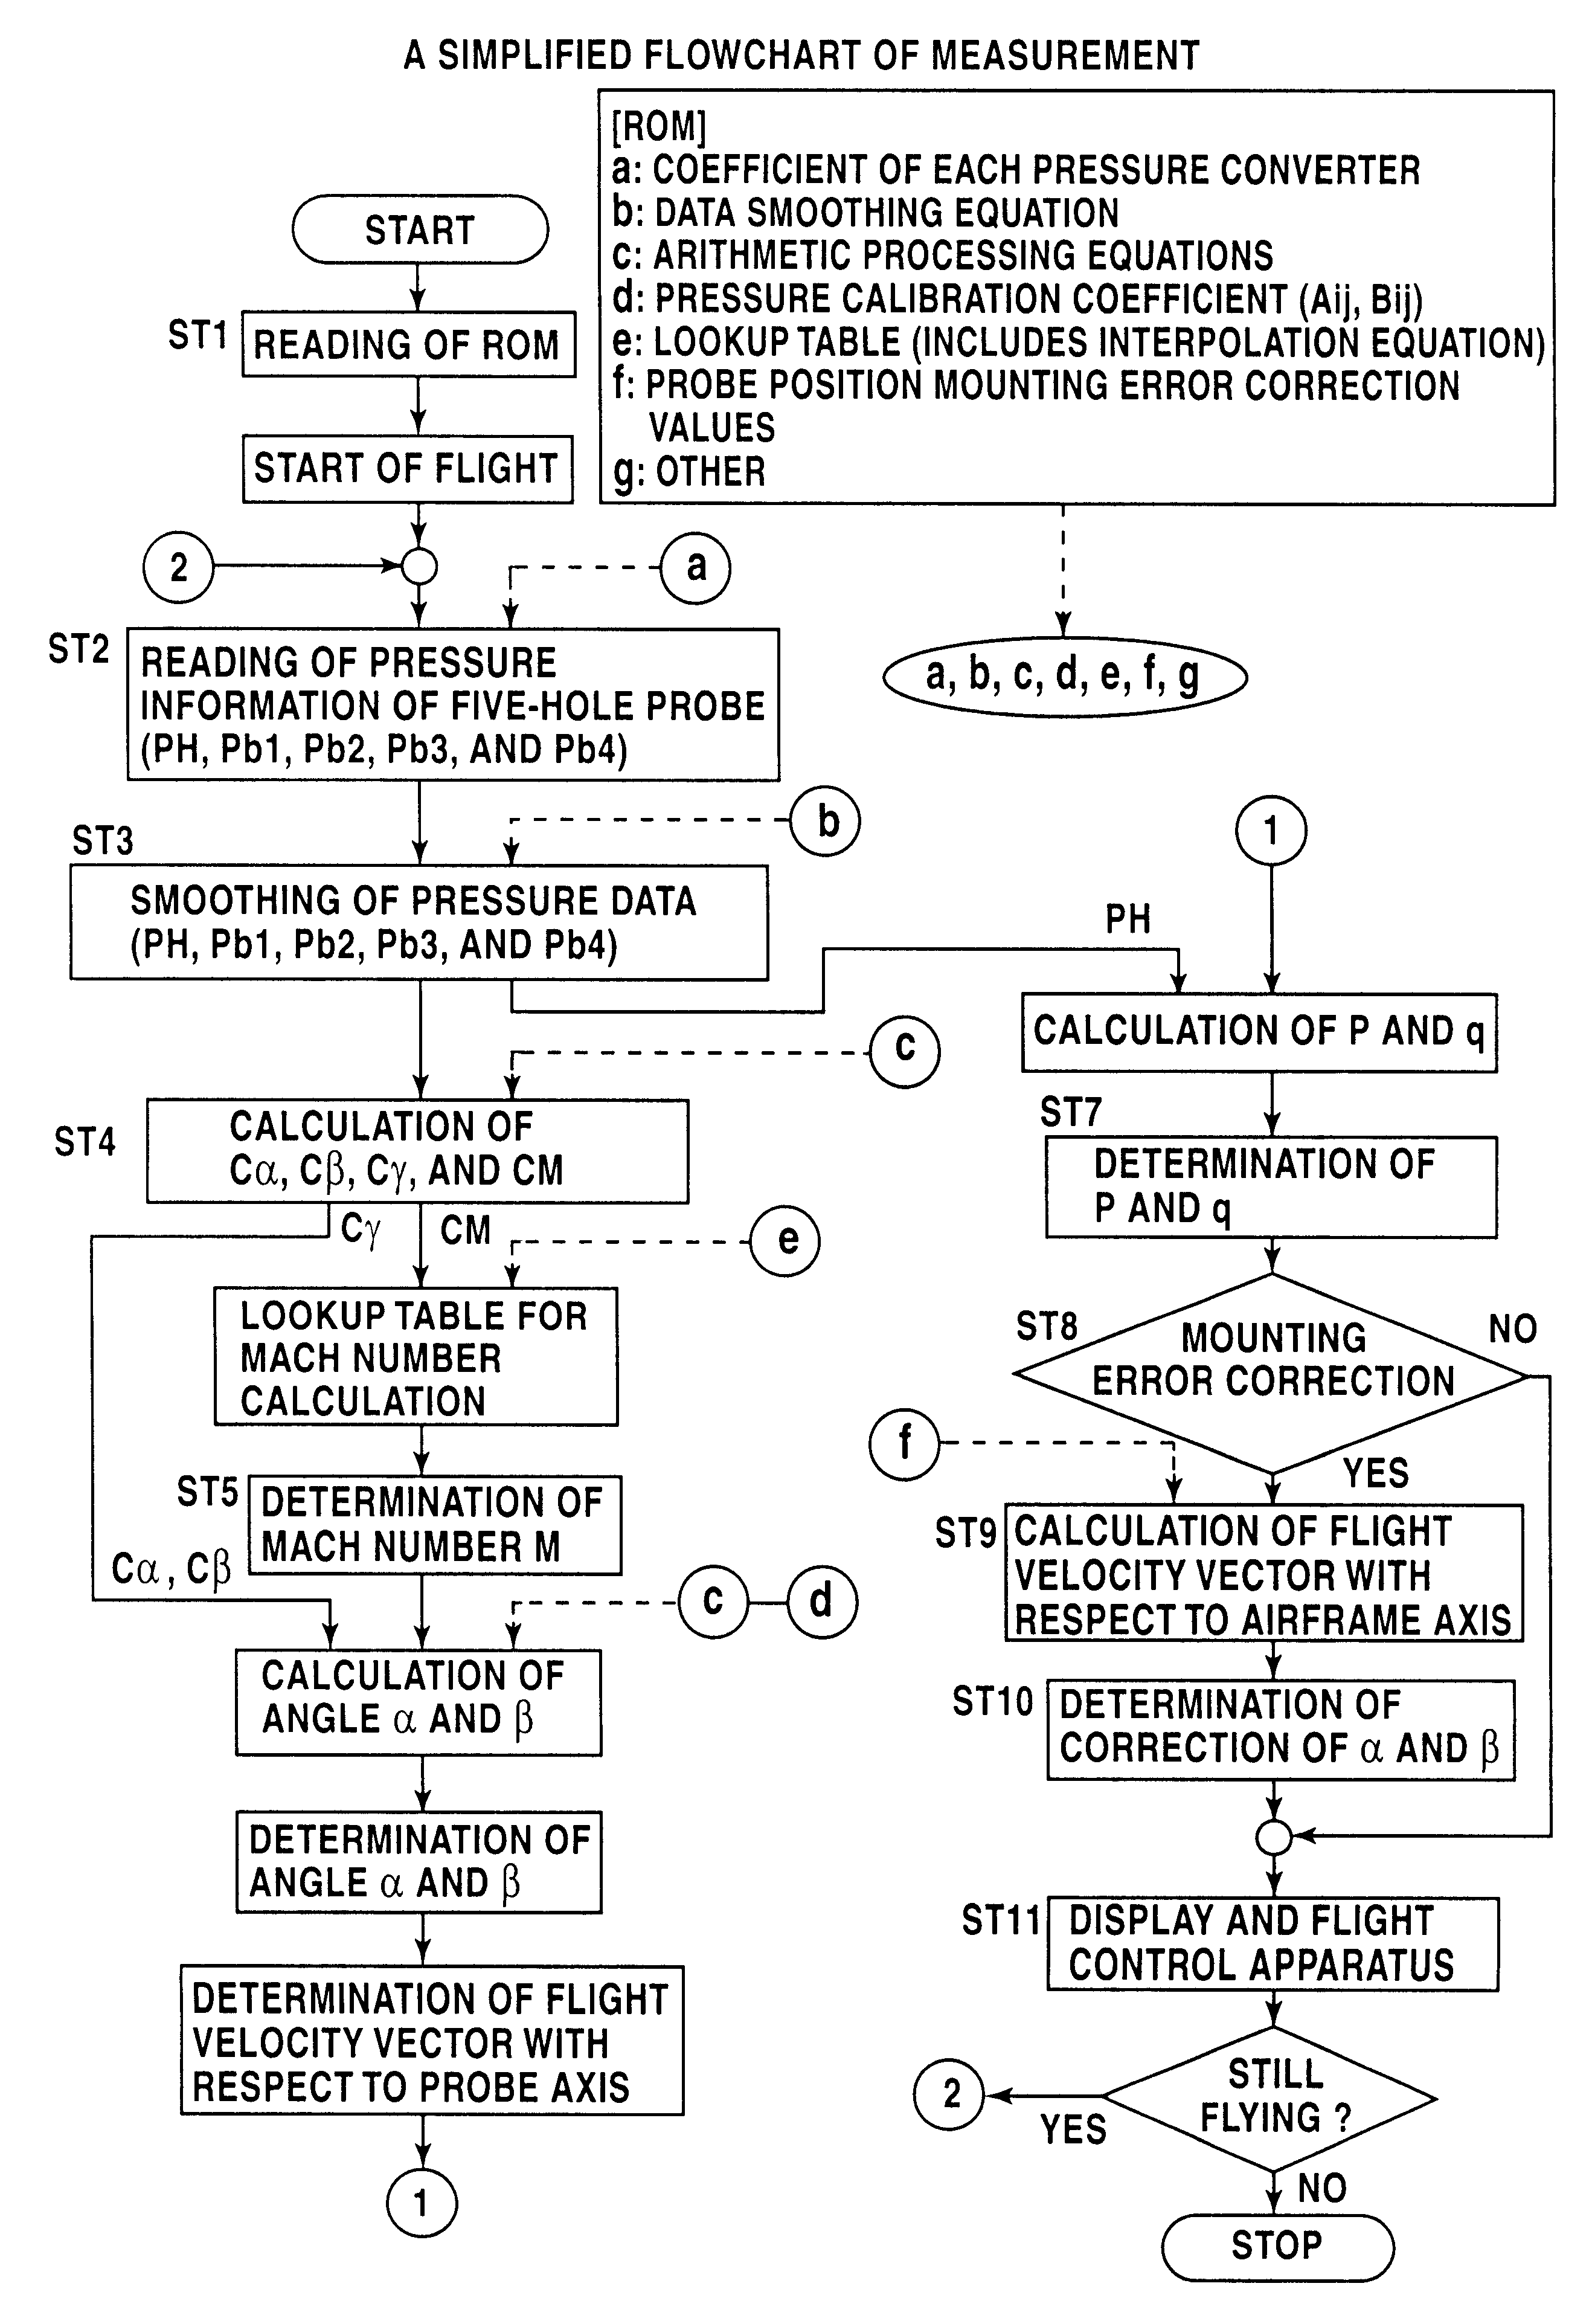 Arithmetic processing method and system in a wide velocity range flight velocity vector measurement system using a square truncated pyramid-shape five-hole pitot probe